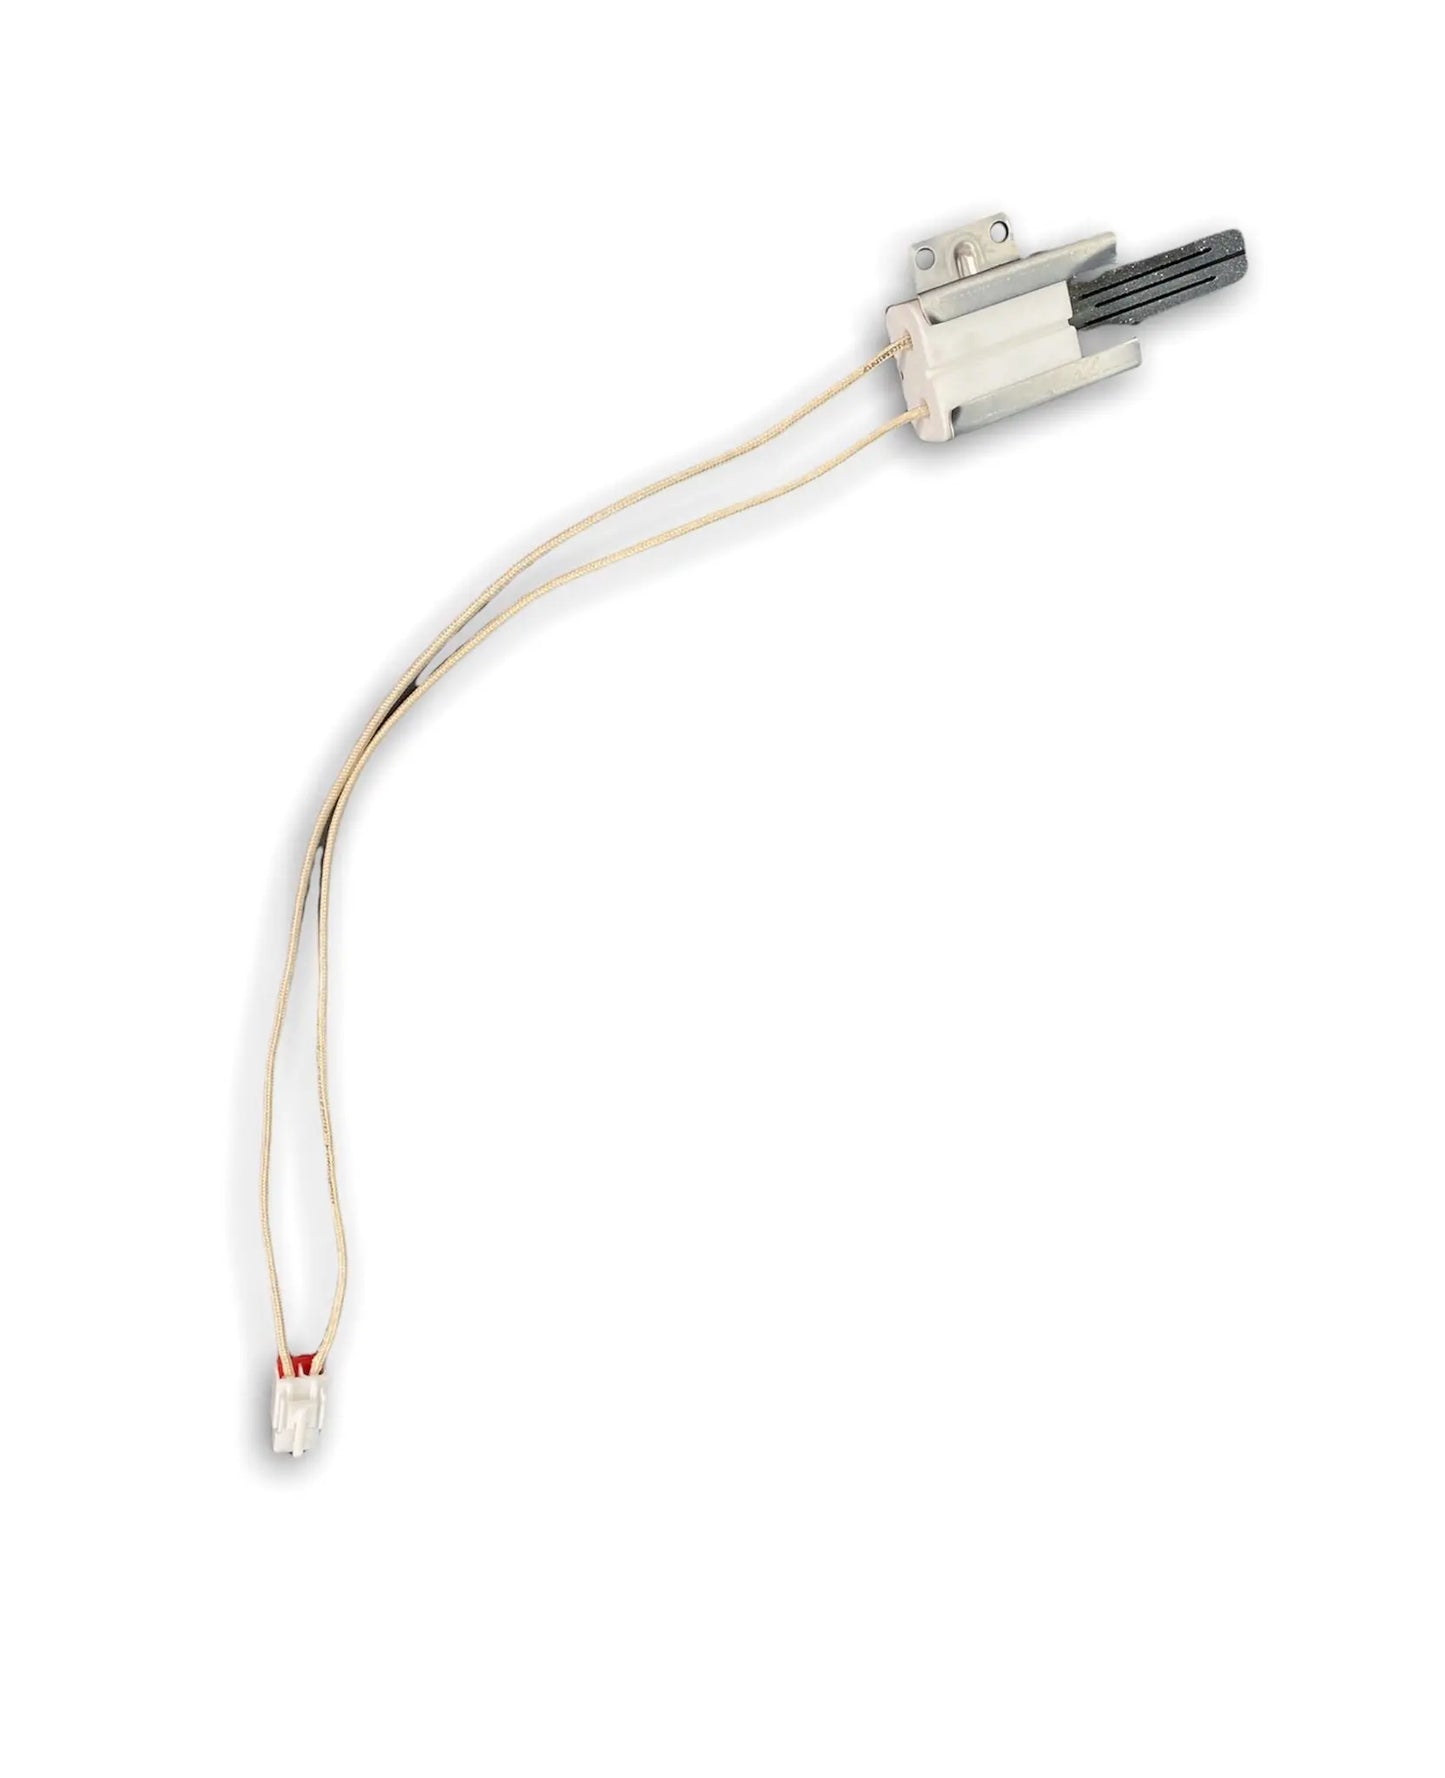 LG Range Flat Gas Igniter, Hot Surface - MEE61841401 or 1599783, REPLACES:  AH3535362 AP5214765 B00AF7WW2M EA3535362 MEE61841402 SGR1401 PD00001851 INVERTEC